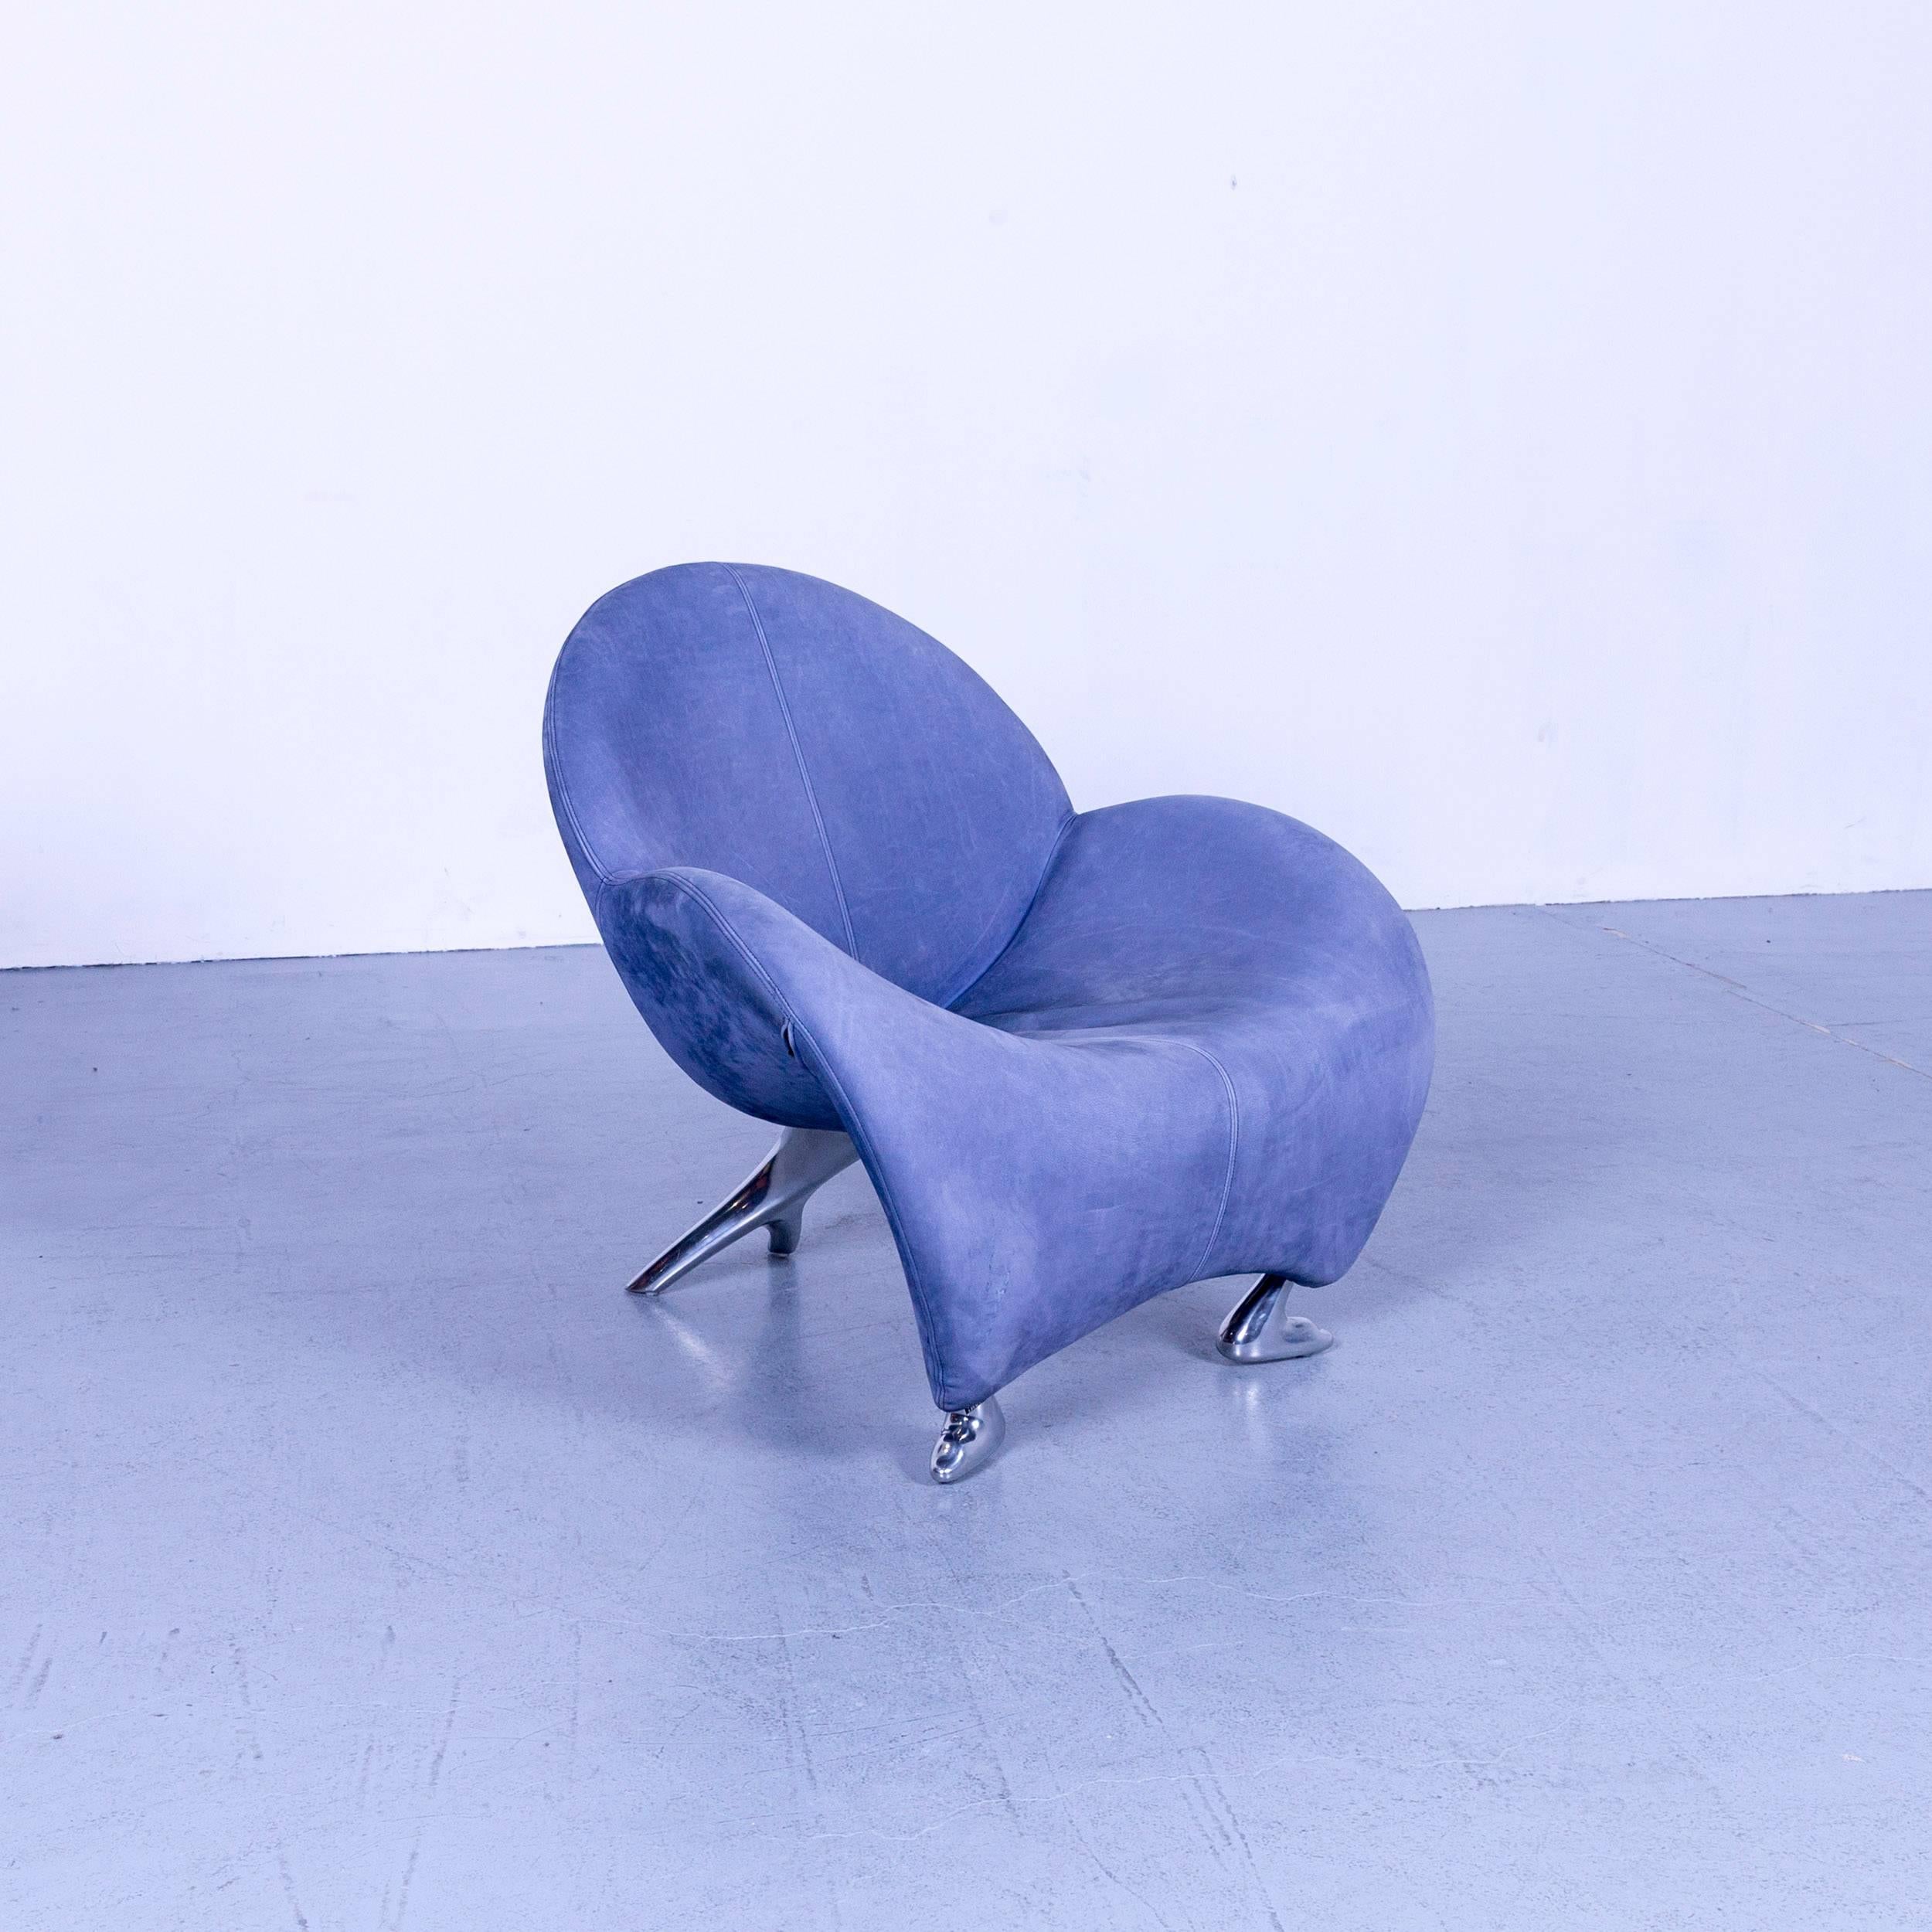 We offer delivery options to most destinations on earth. Find our shipping quotes at the bottom of this page in the shipping section.

An Leolux Papageno Armchair Blue One-Seater Couch Modern

Shipping:

An on point shipping process is our priority.